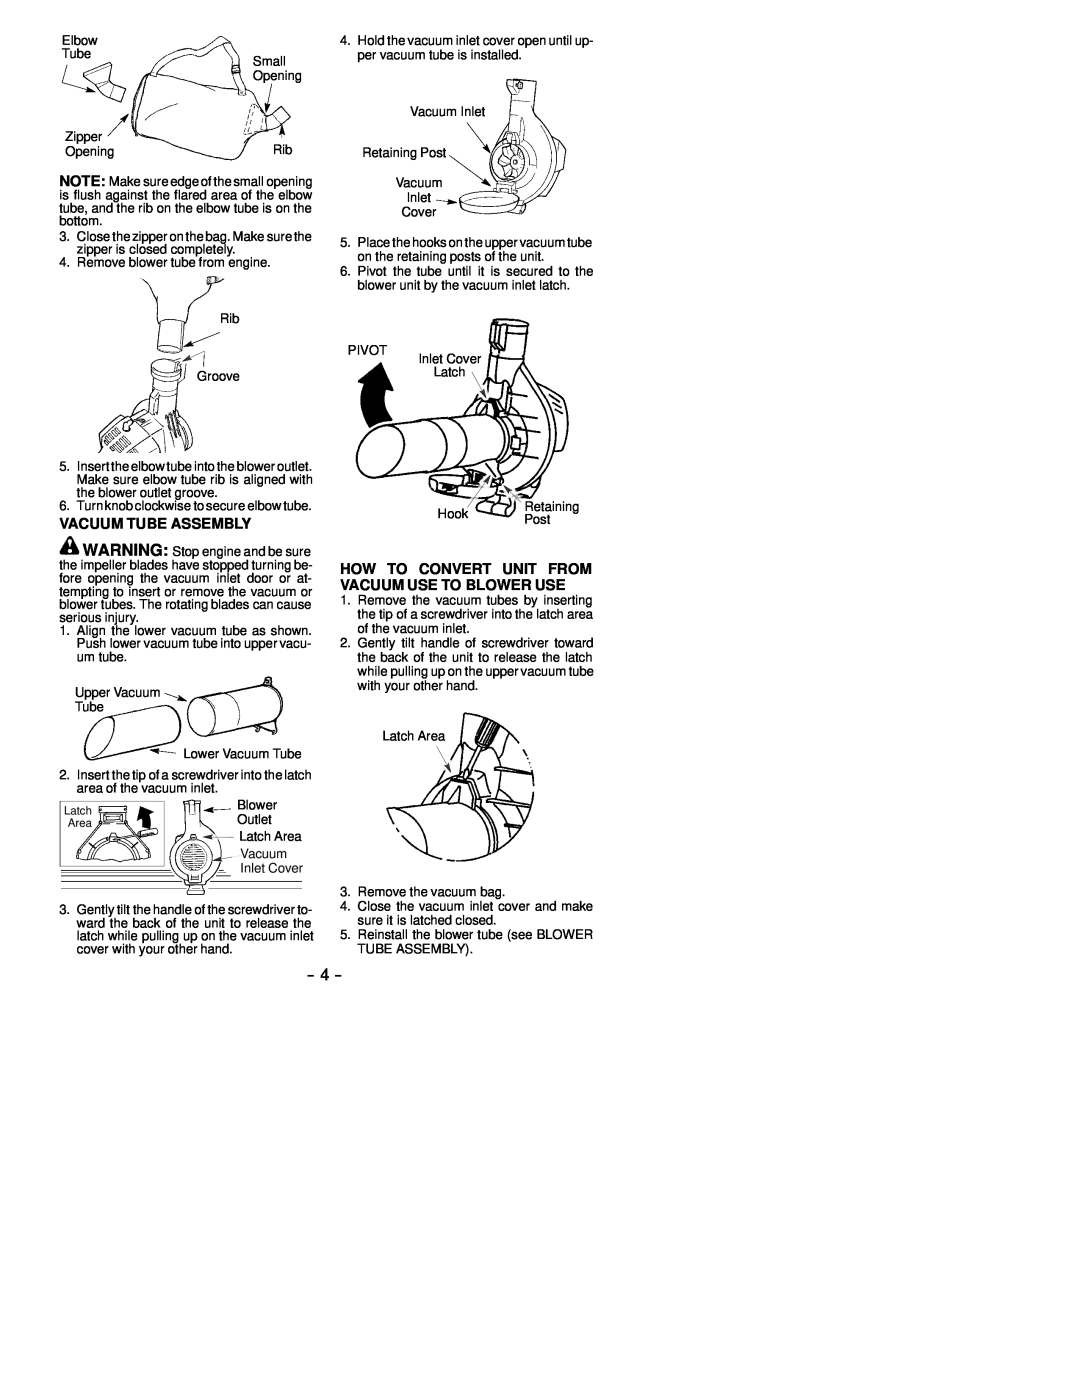 Poulan 530164583 instruction manual Vacuum Tube Assembly, How To Convert Unit From Vacuum Use To Blower Use, Latch 